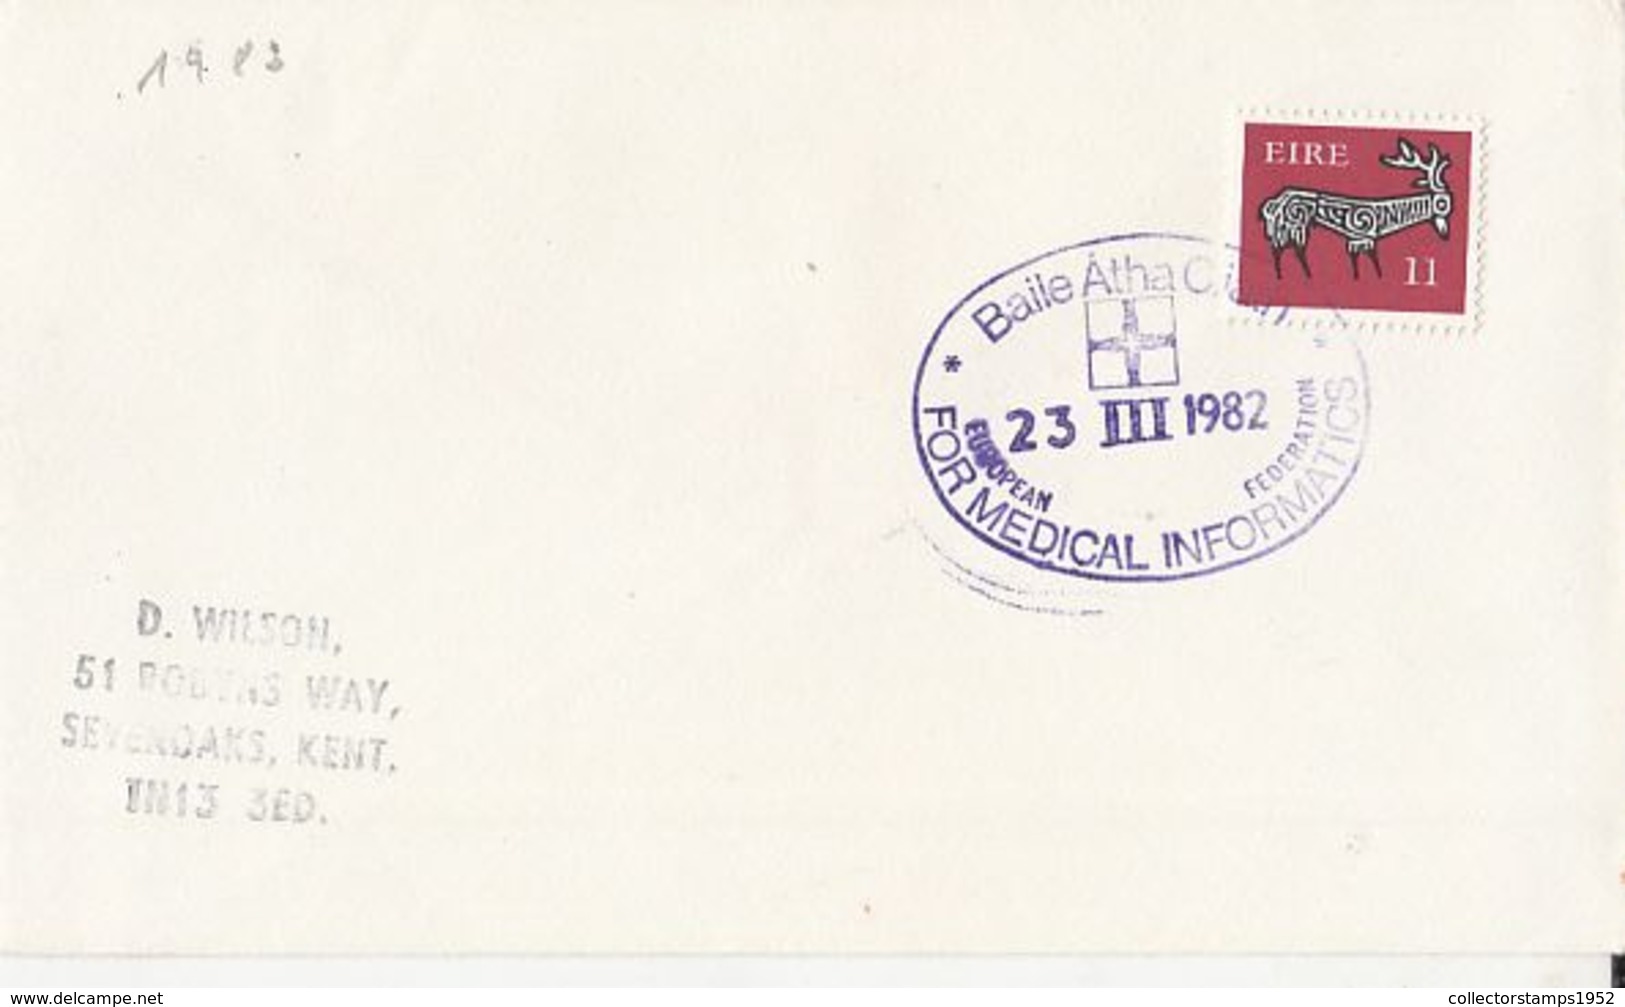 83577- BAILE ATHA CLIATH MEDICAL INFORMATICS SPECIAL POSTMARK ON COVER, DEER STAMP, 1982, IRELAND - Lettres & Documents